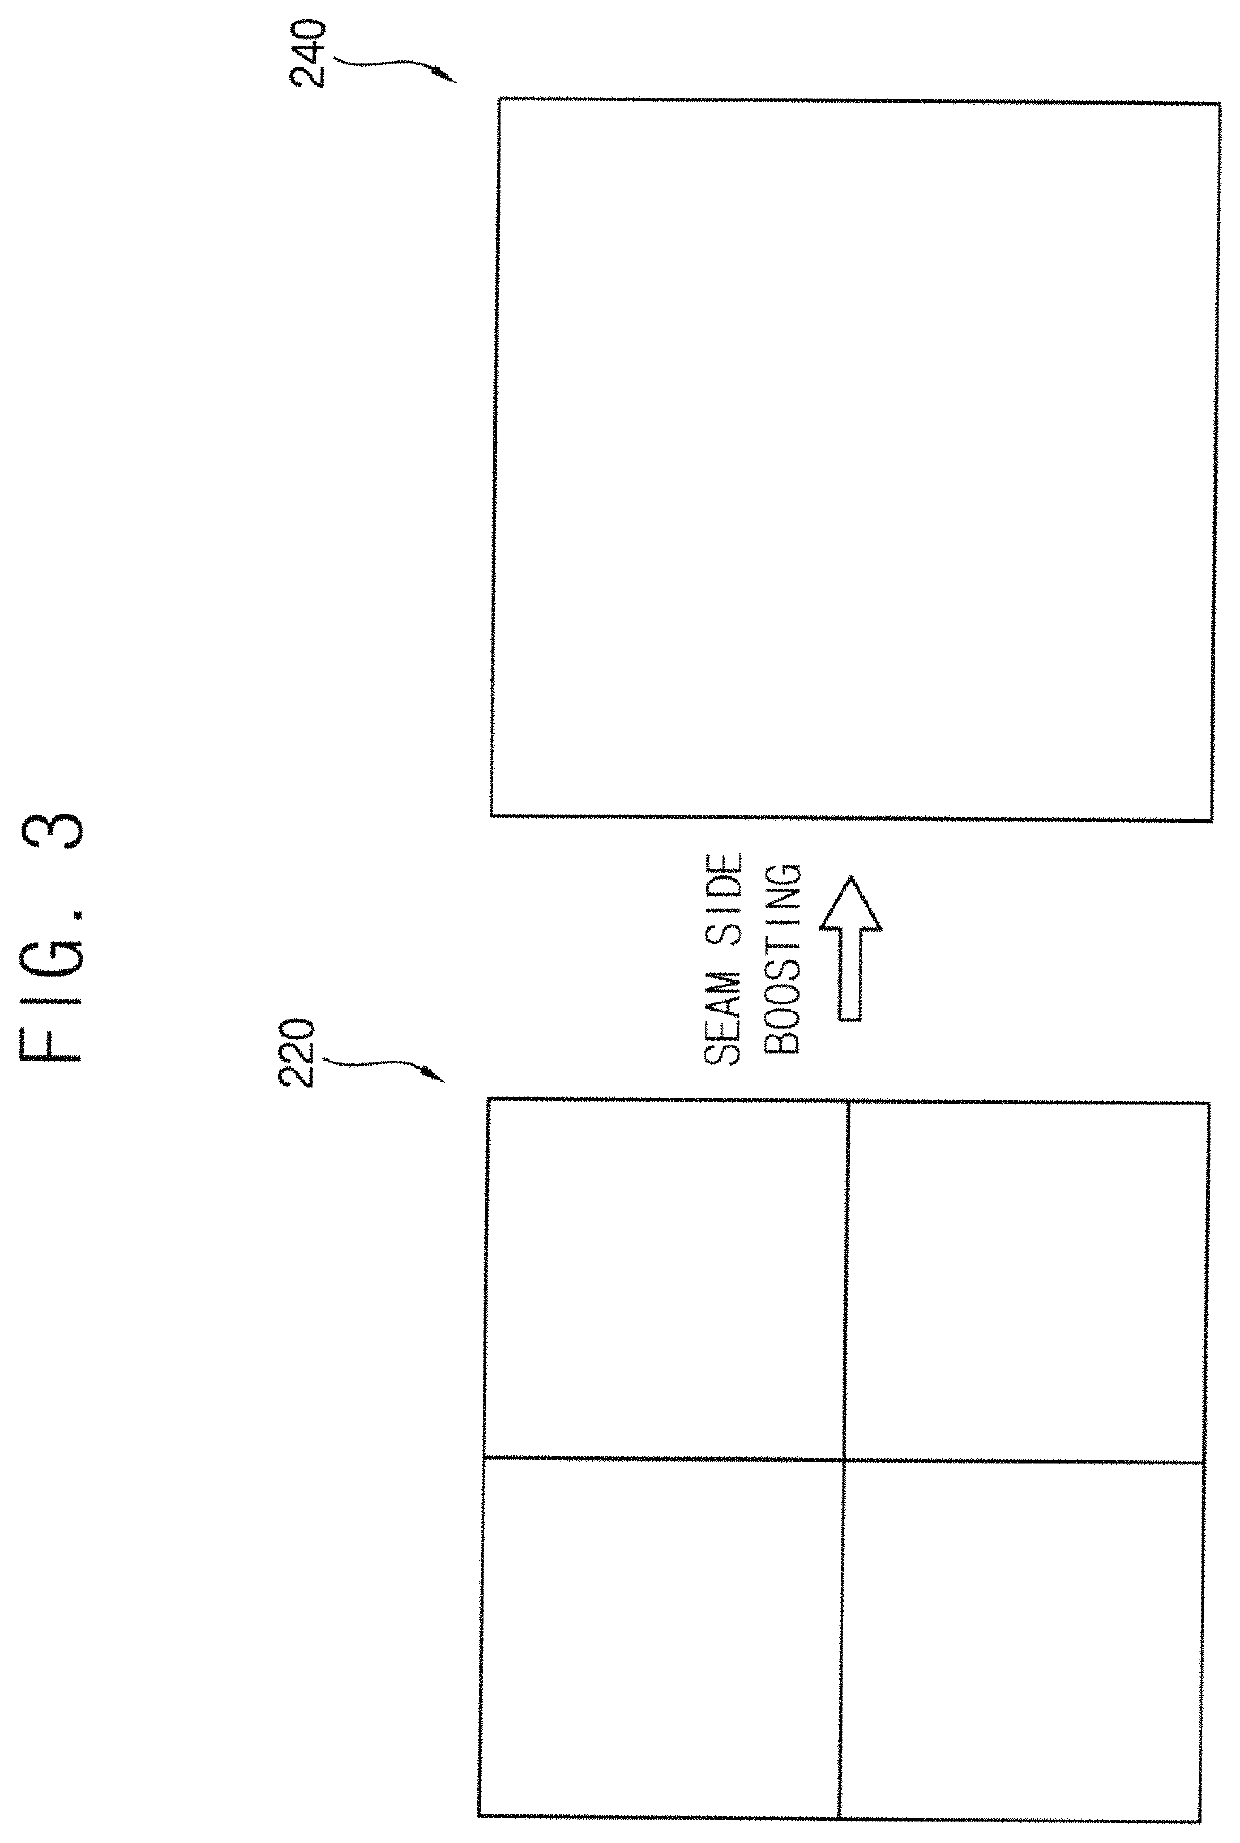 Tiled display device having a plurality of display panels